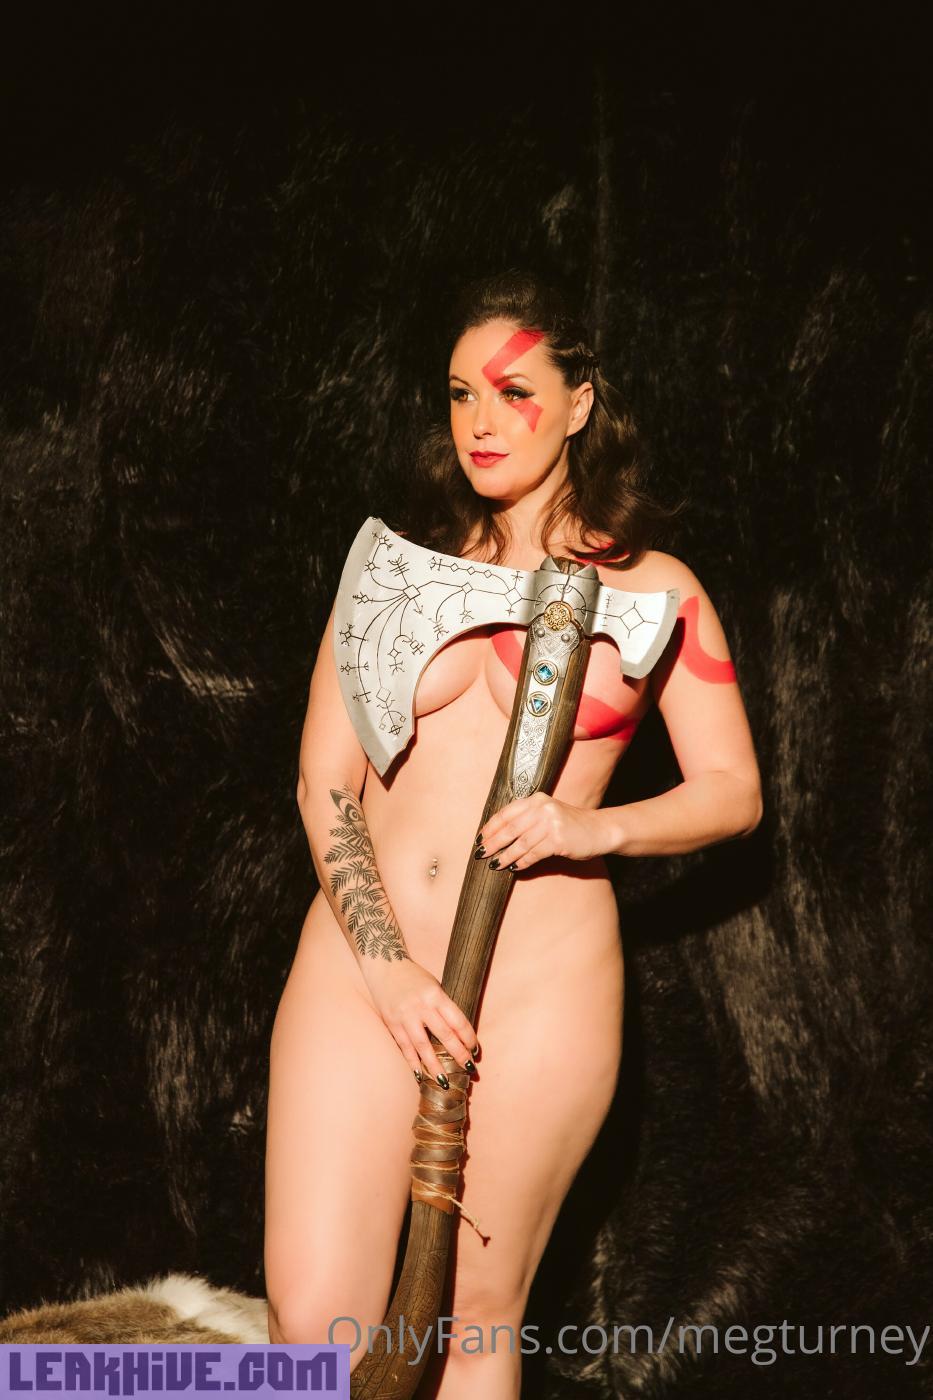 meg turney nude with axe onlyfans set leaked DYXYOG